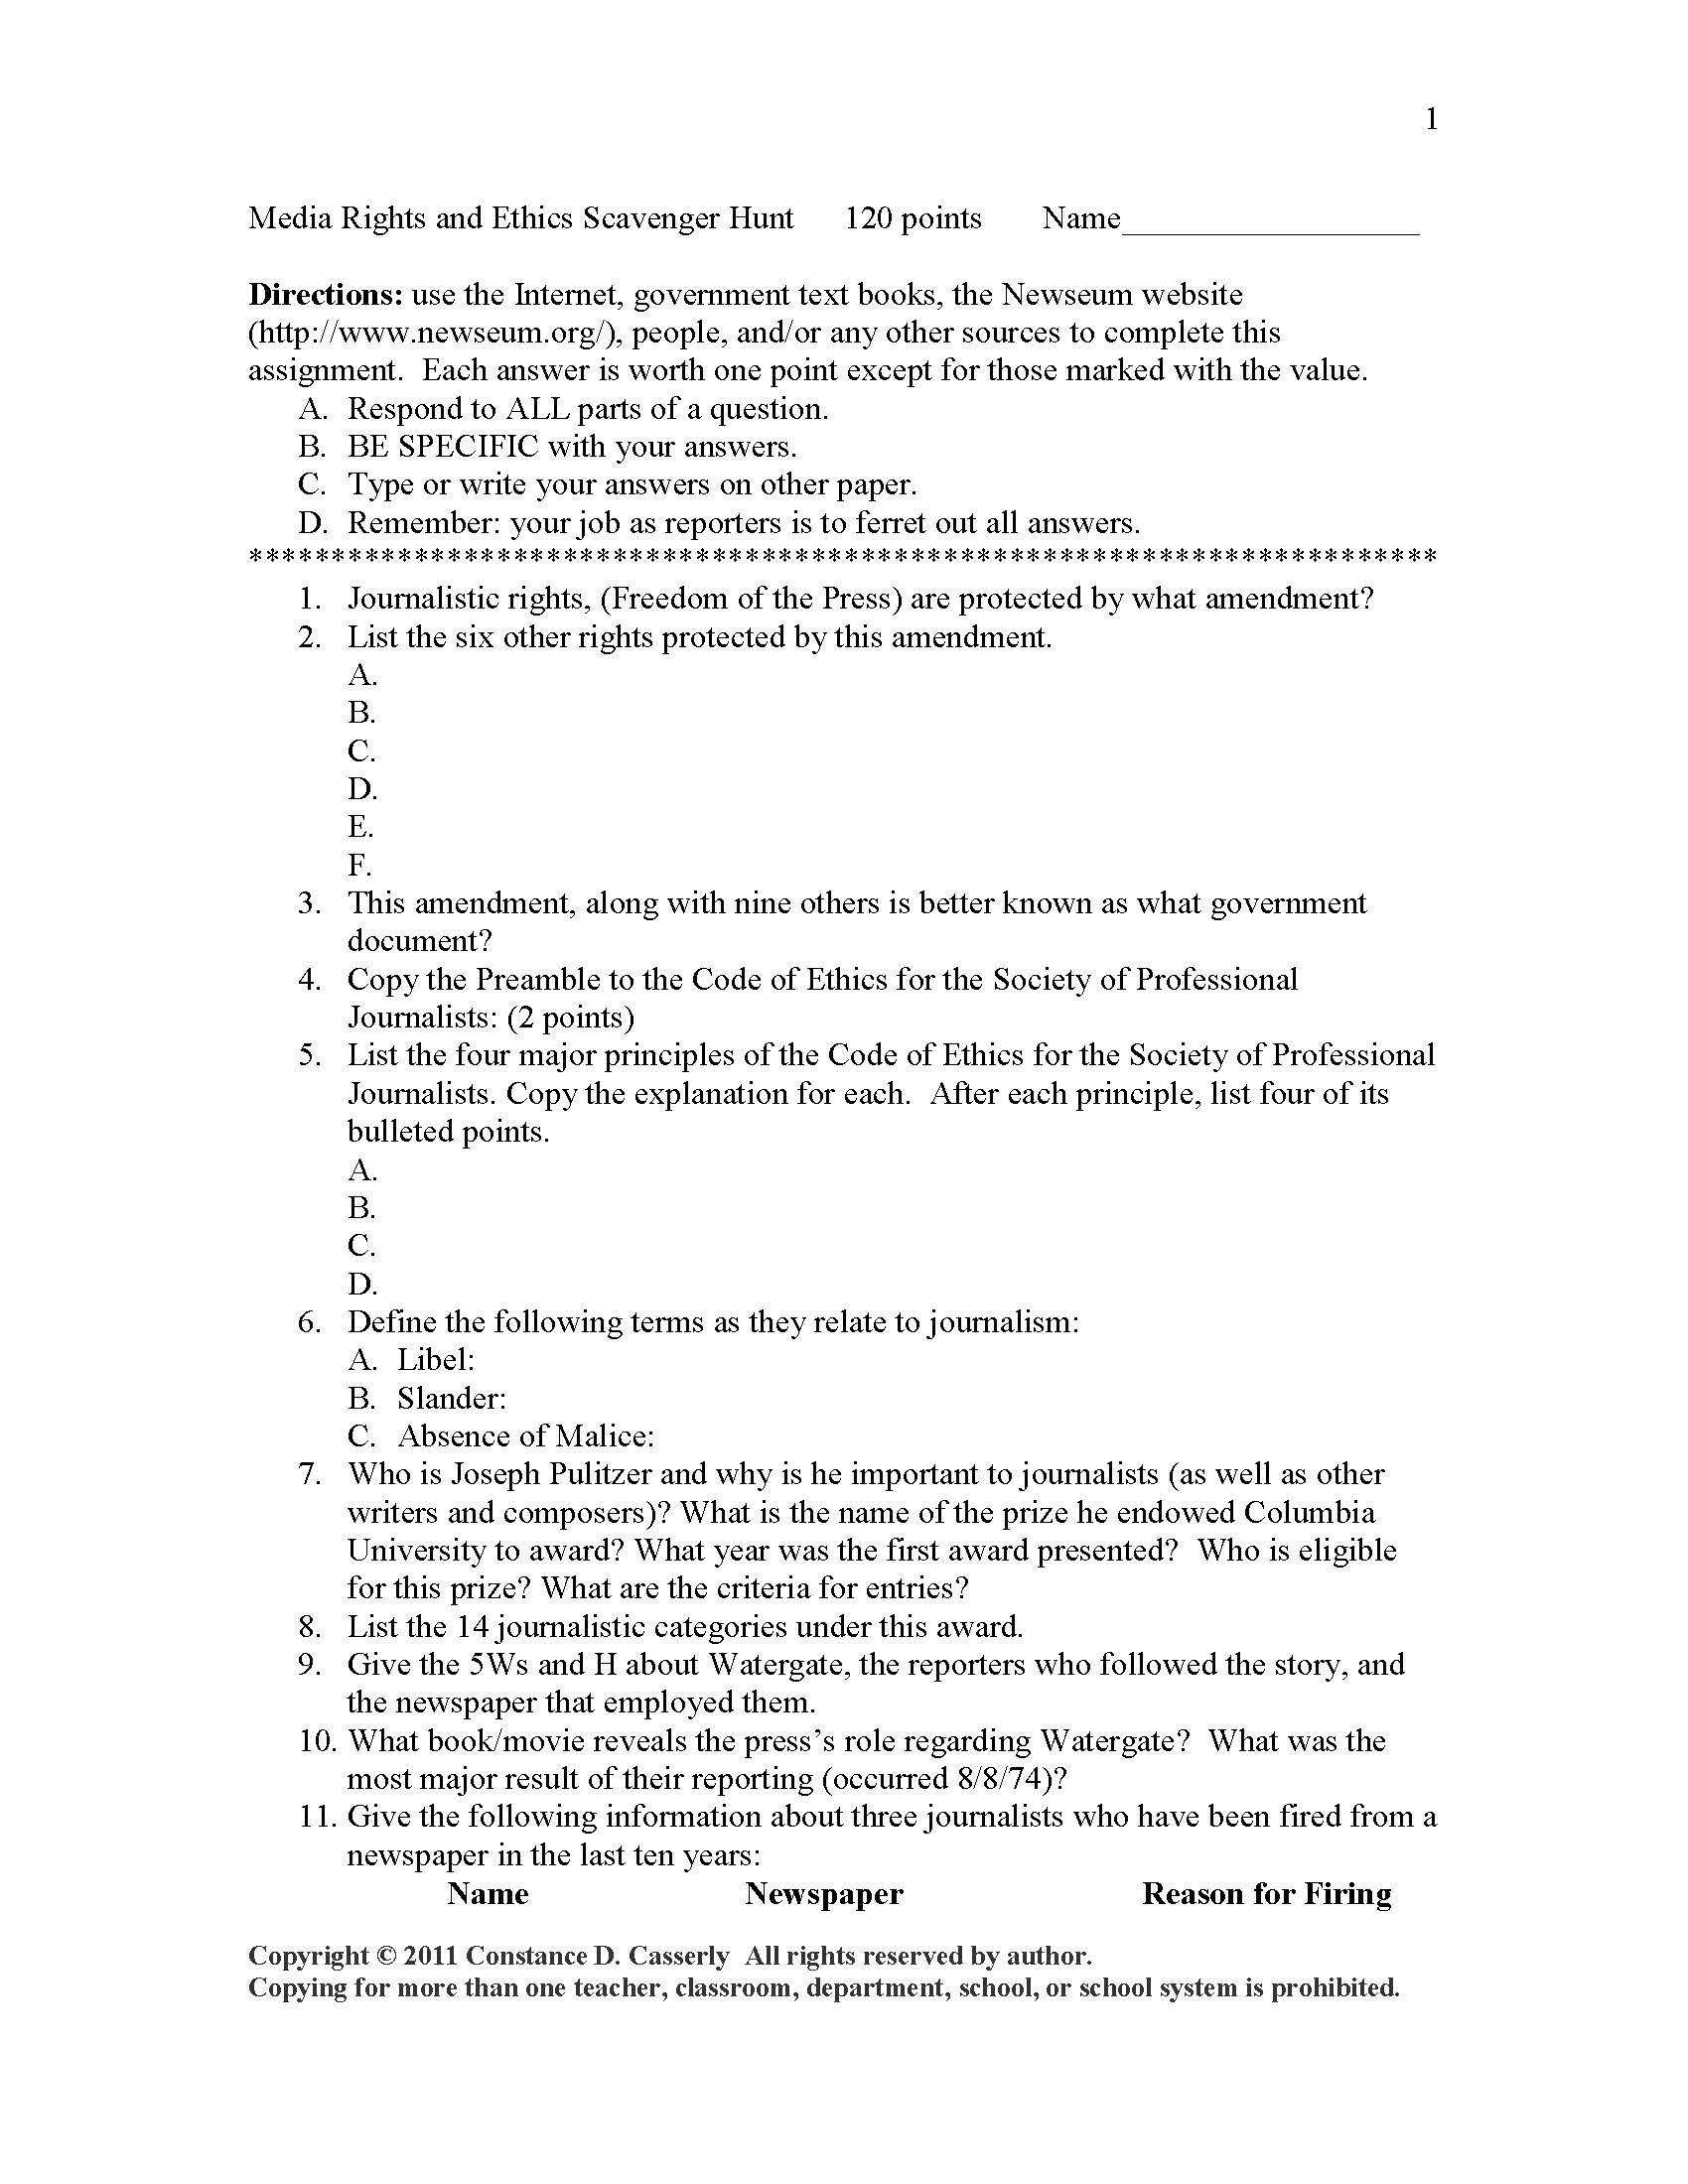 Constitutional Principles Worksheet Answers Also Constitution Worksheet Ce92c0312a9b Battk